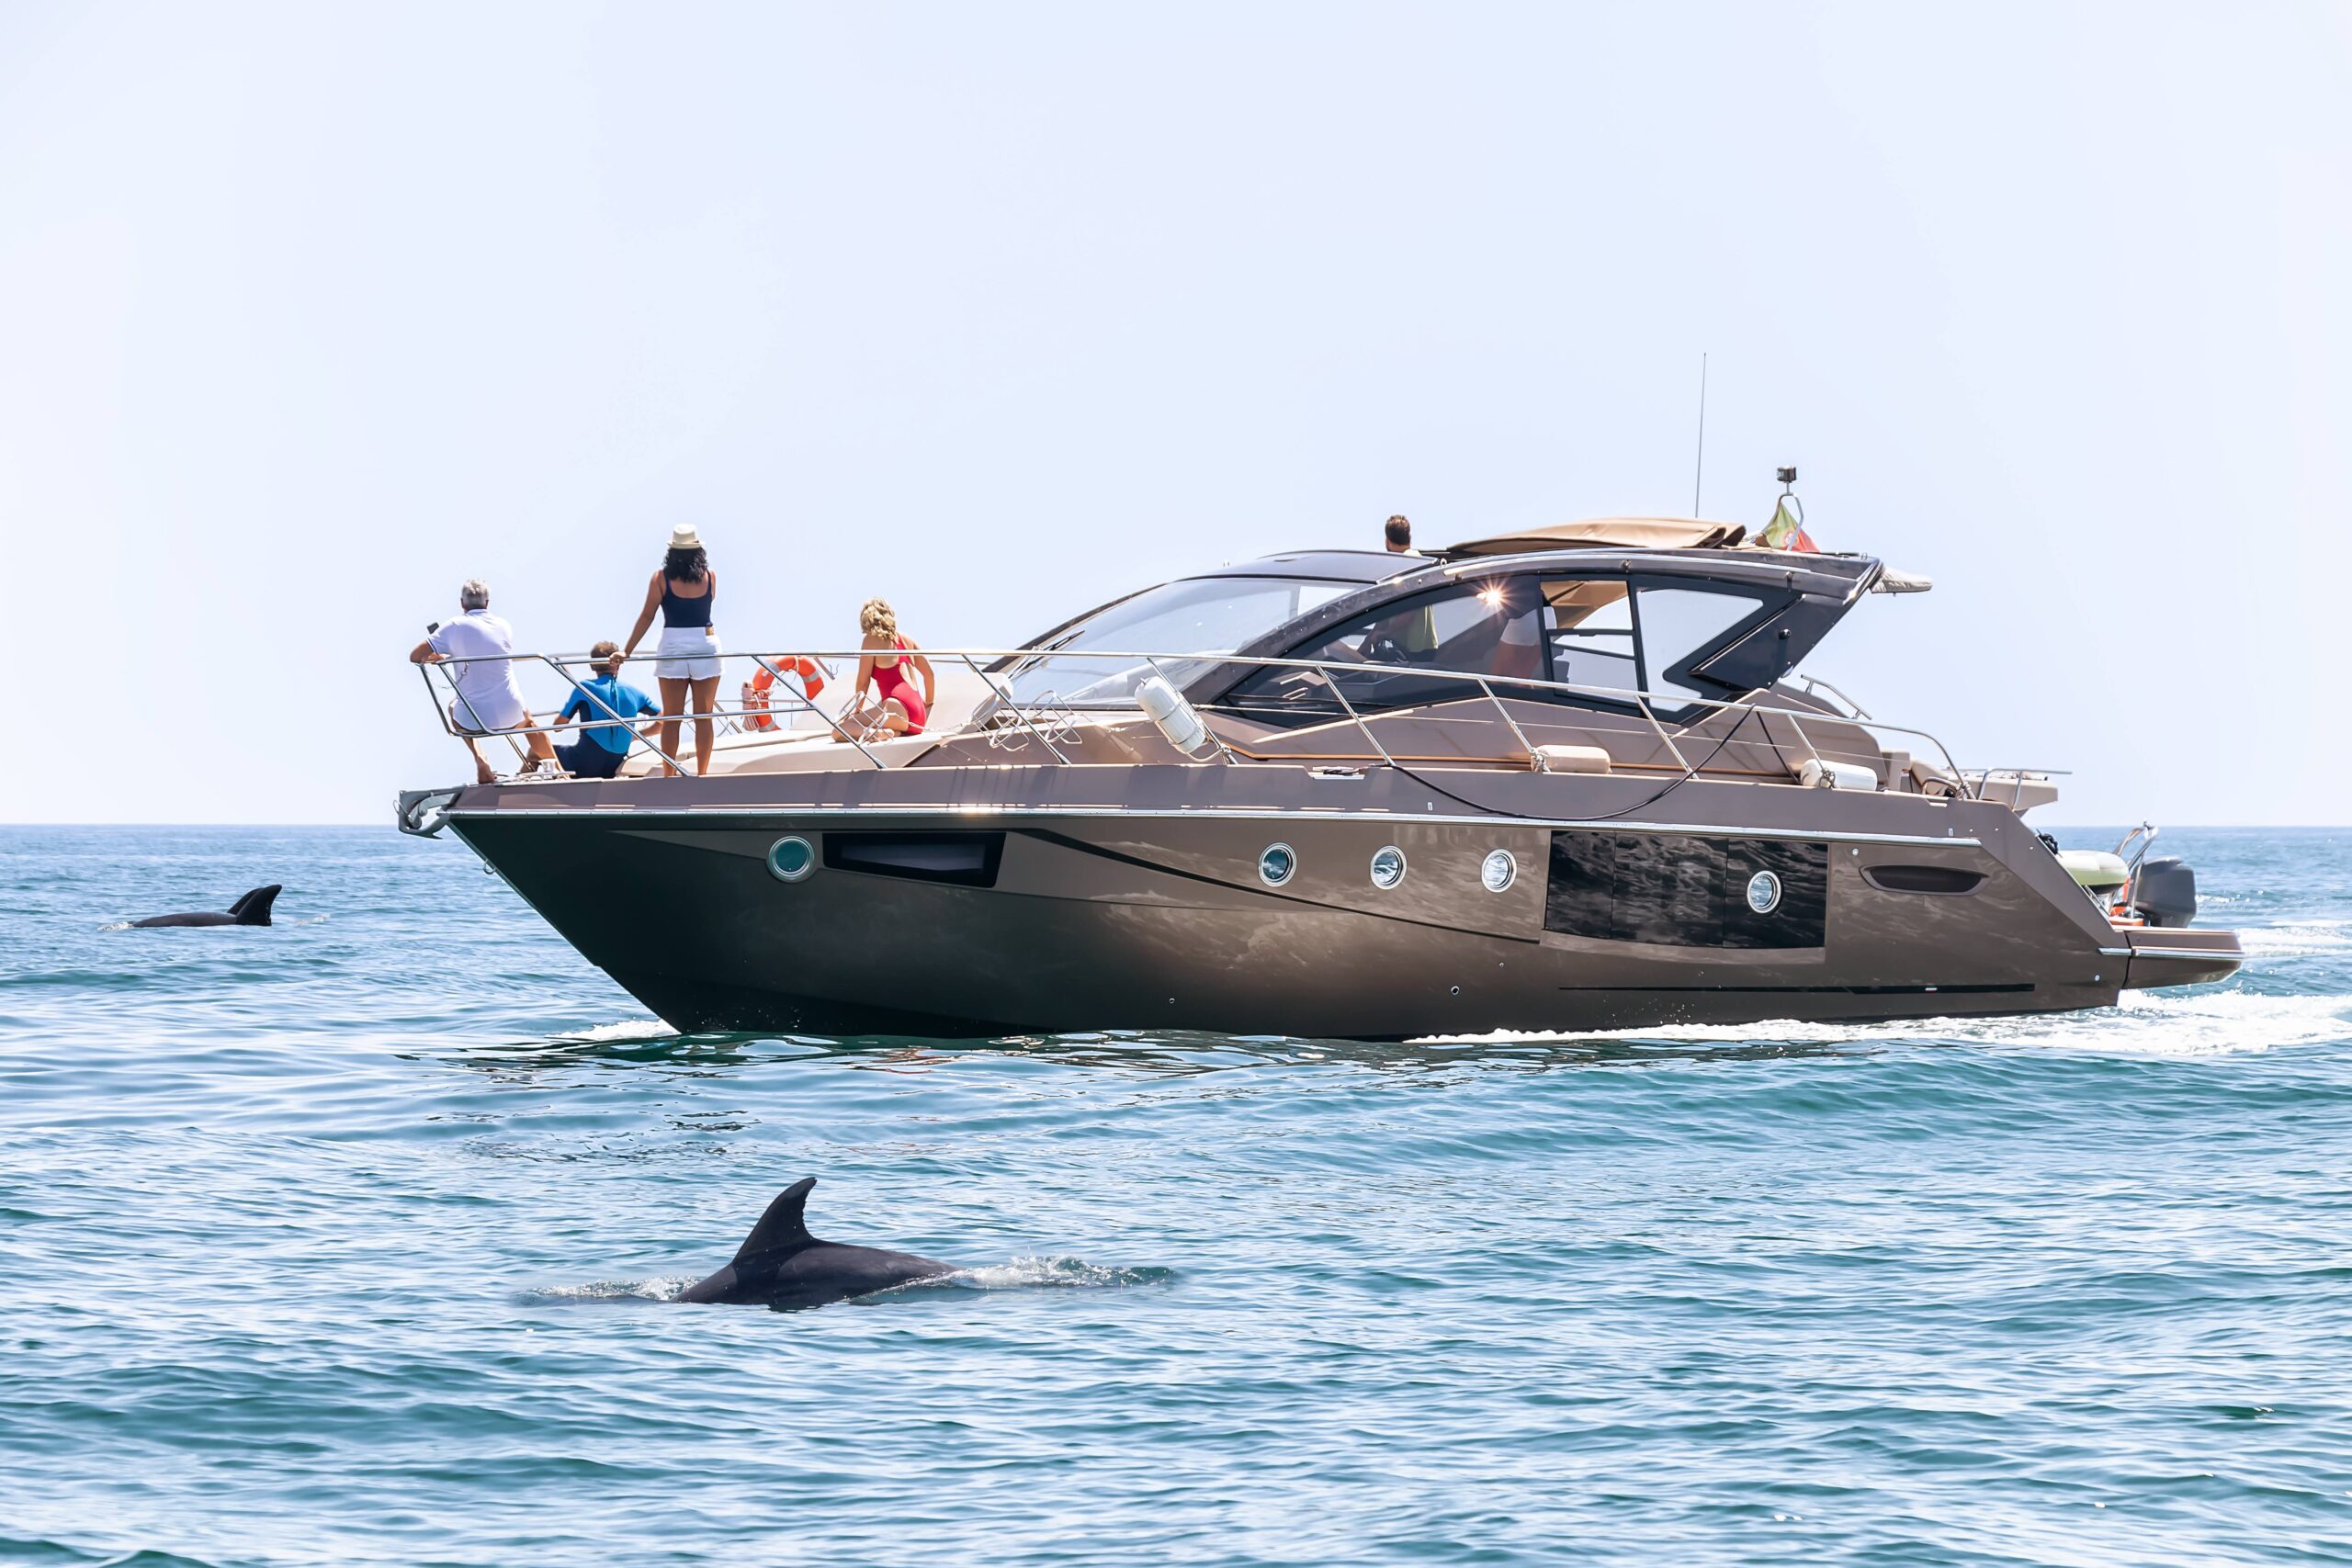 People aboard a luxury yacht watching dolphins, Lagos, Algarve, Portugal